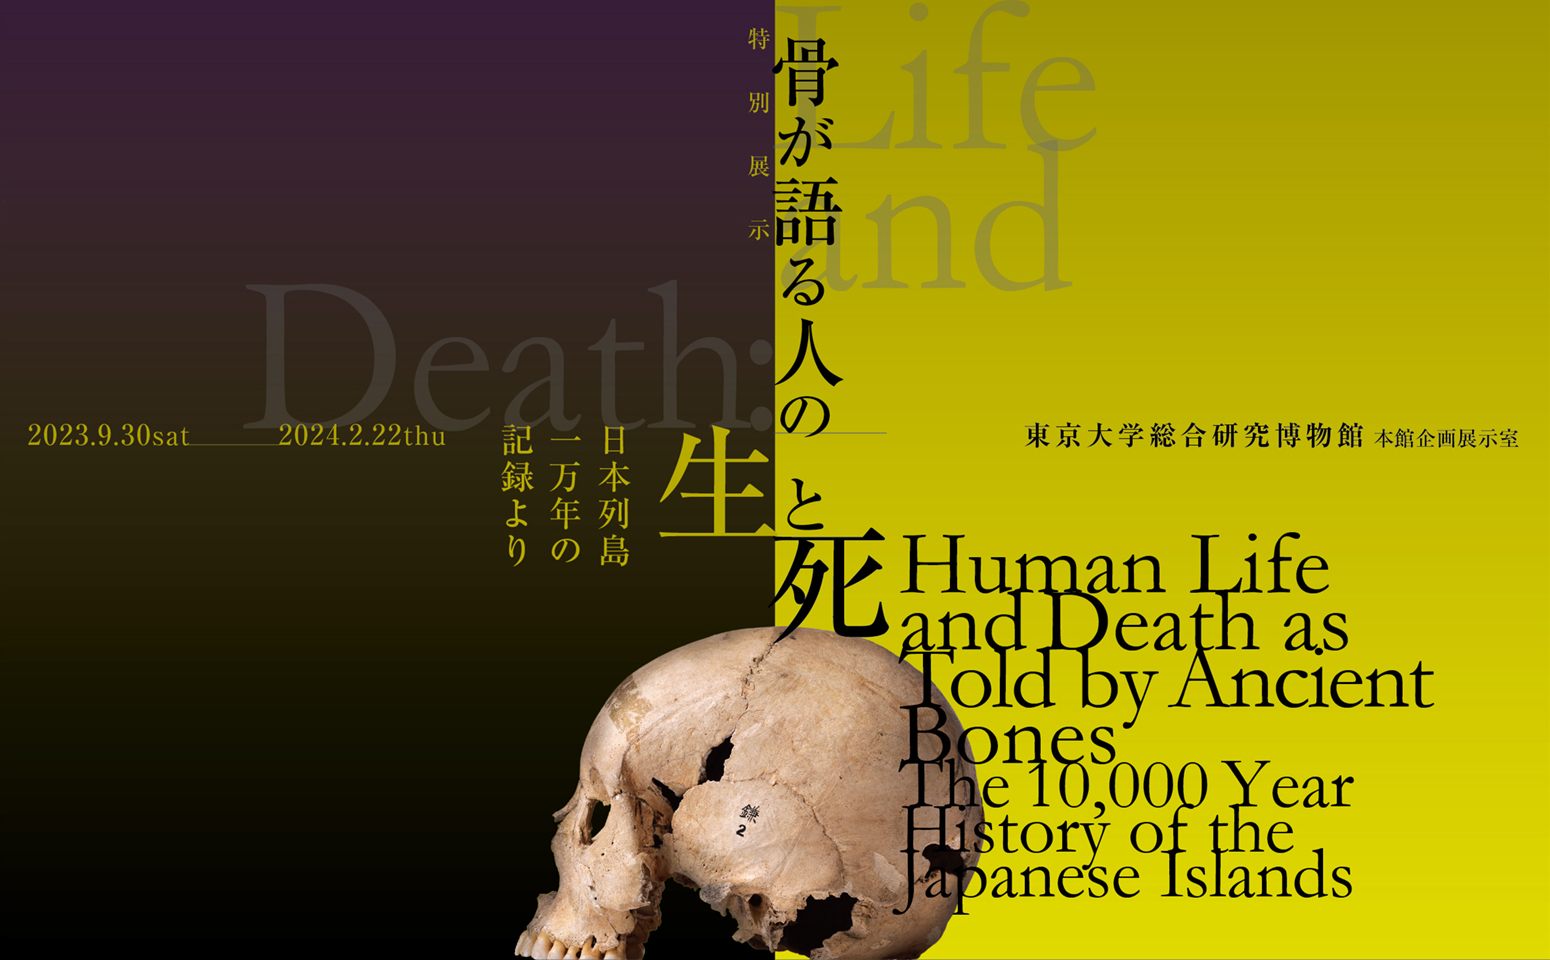 Human Life and Death as Told by Ancient Bones : The 10,000 Year History of the Japanese Islands